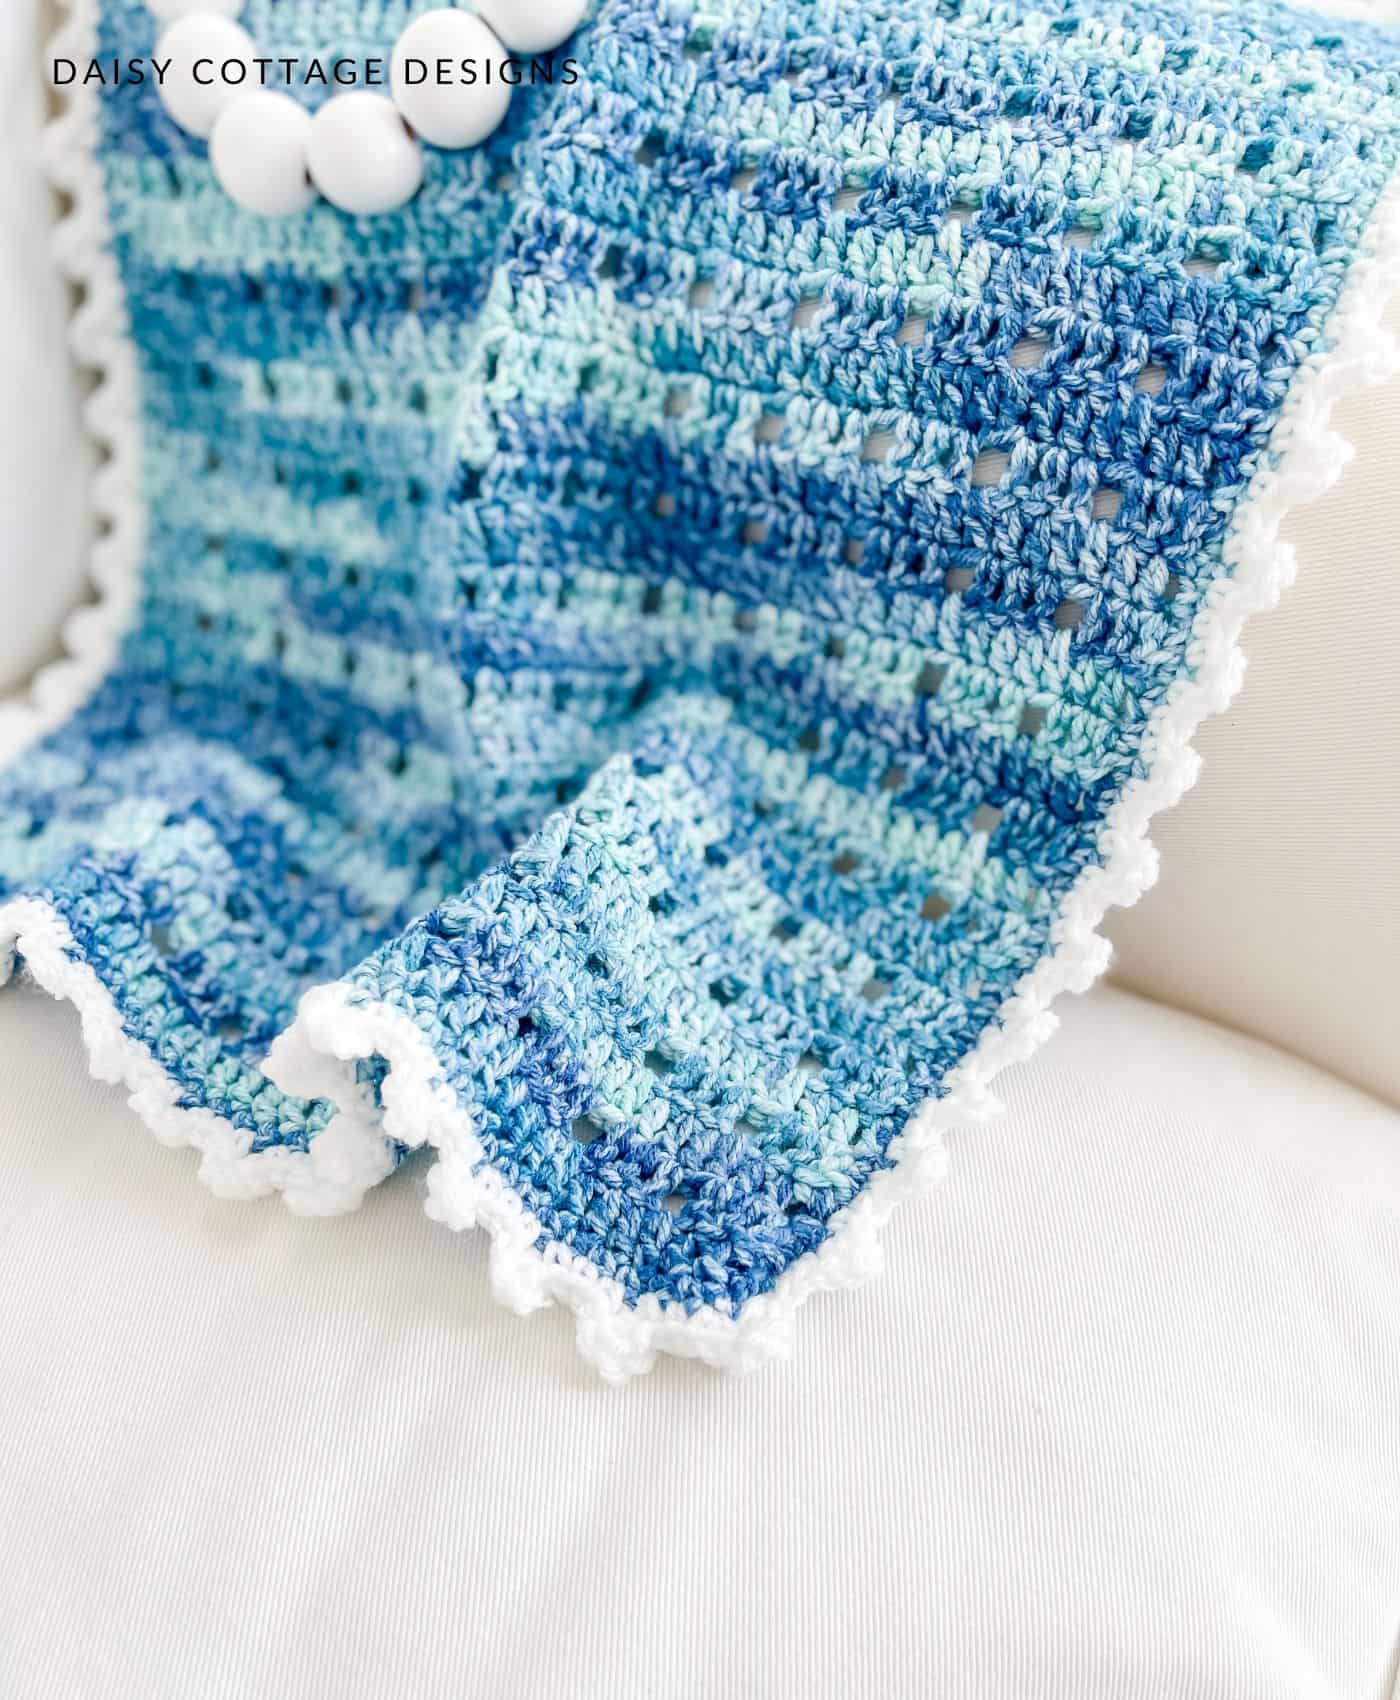 Double Crochet blanket with picot edging